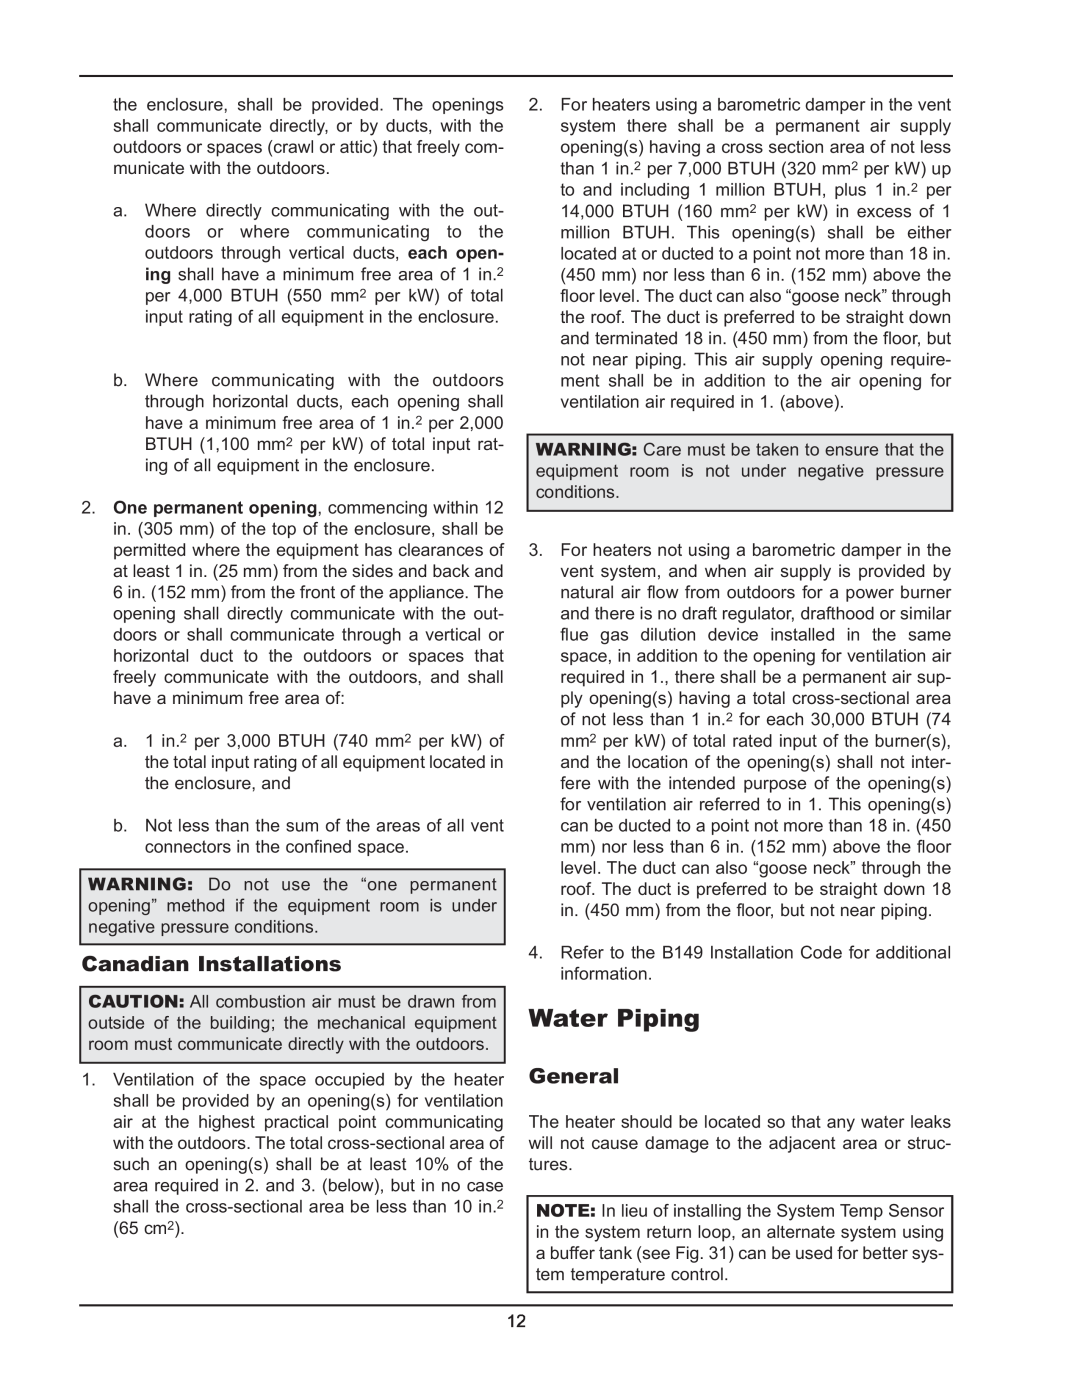 Raypak 5042004 operating instructions Water Piping, Canadian Installations, General 